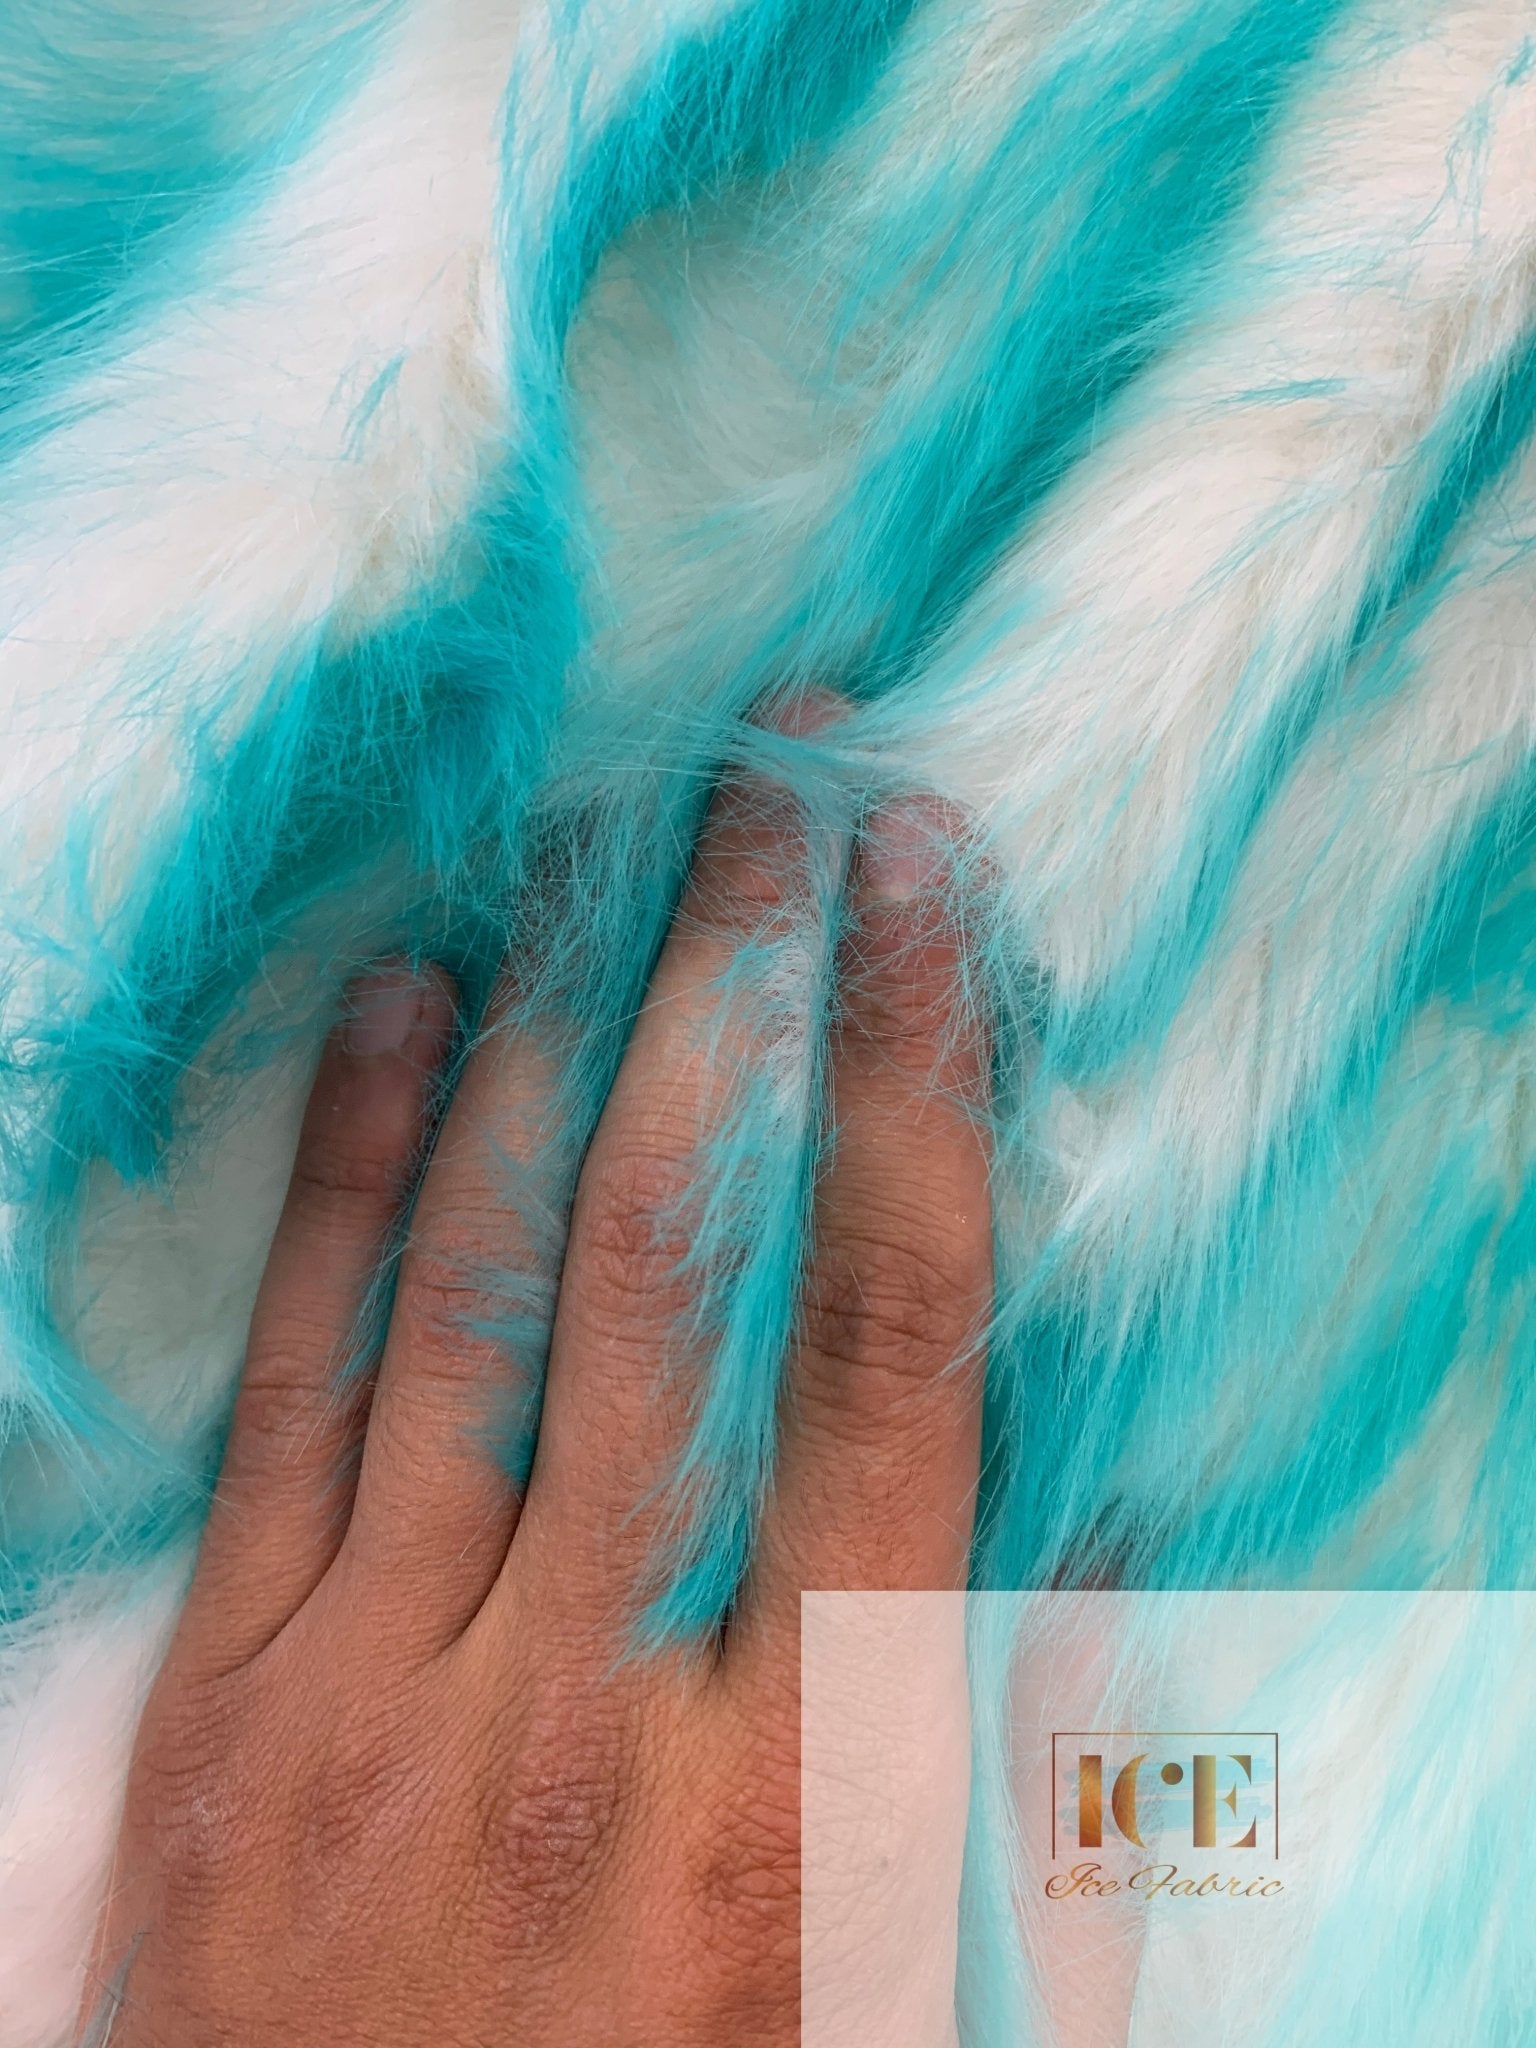 Canadian Fox 2 Tone Shaggy Long Pile Faux Fur Fabric For Blankets, Costumes, Bed SpreadICEFABRICICE FABRICSAquaBy The Yard (60 inches Wide)Canadian Fox 2 Tone Shaggy Long Pile Faux Fur Fabric For Blankets, Costumes, Bed Spread ICEFABRIC Aqua